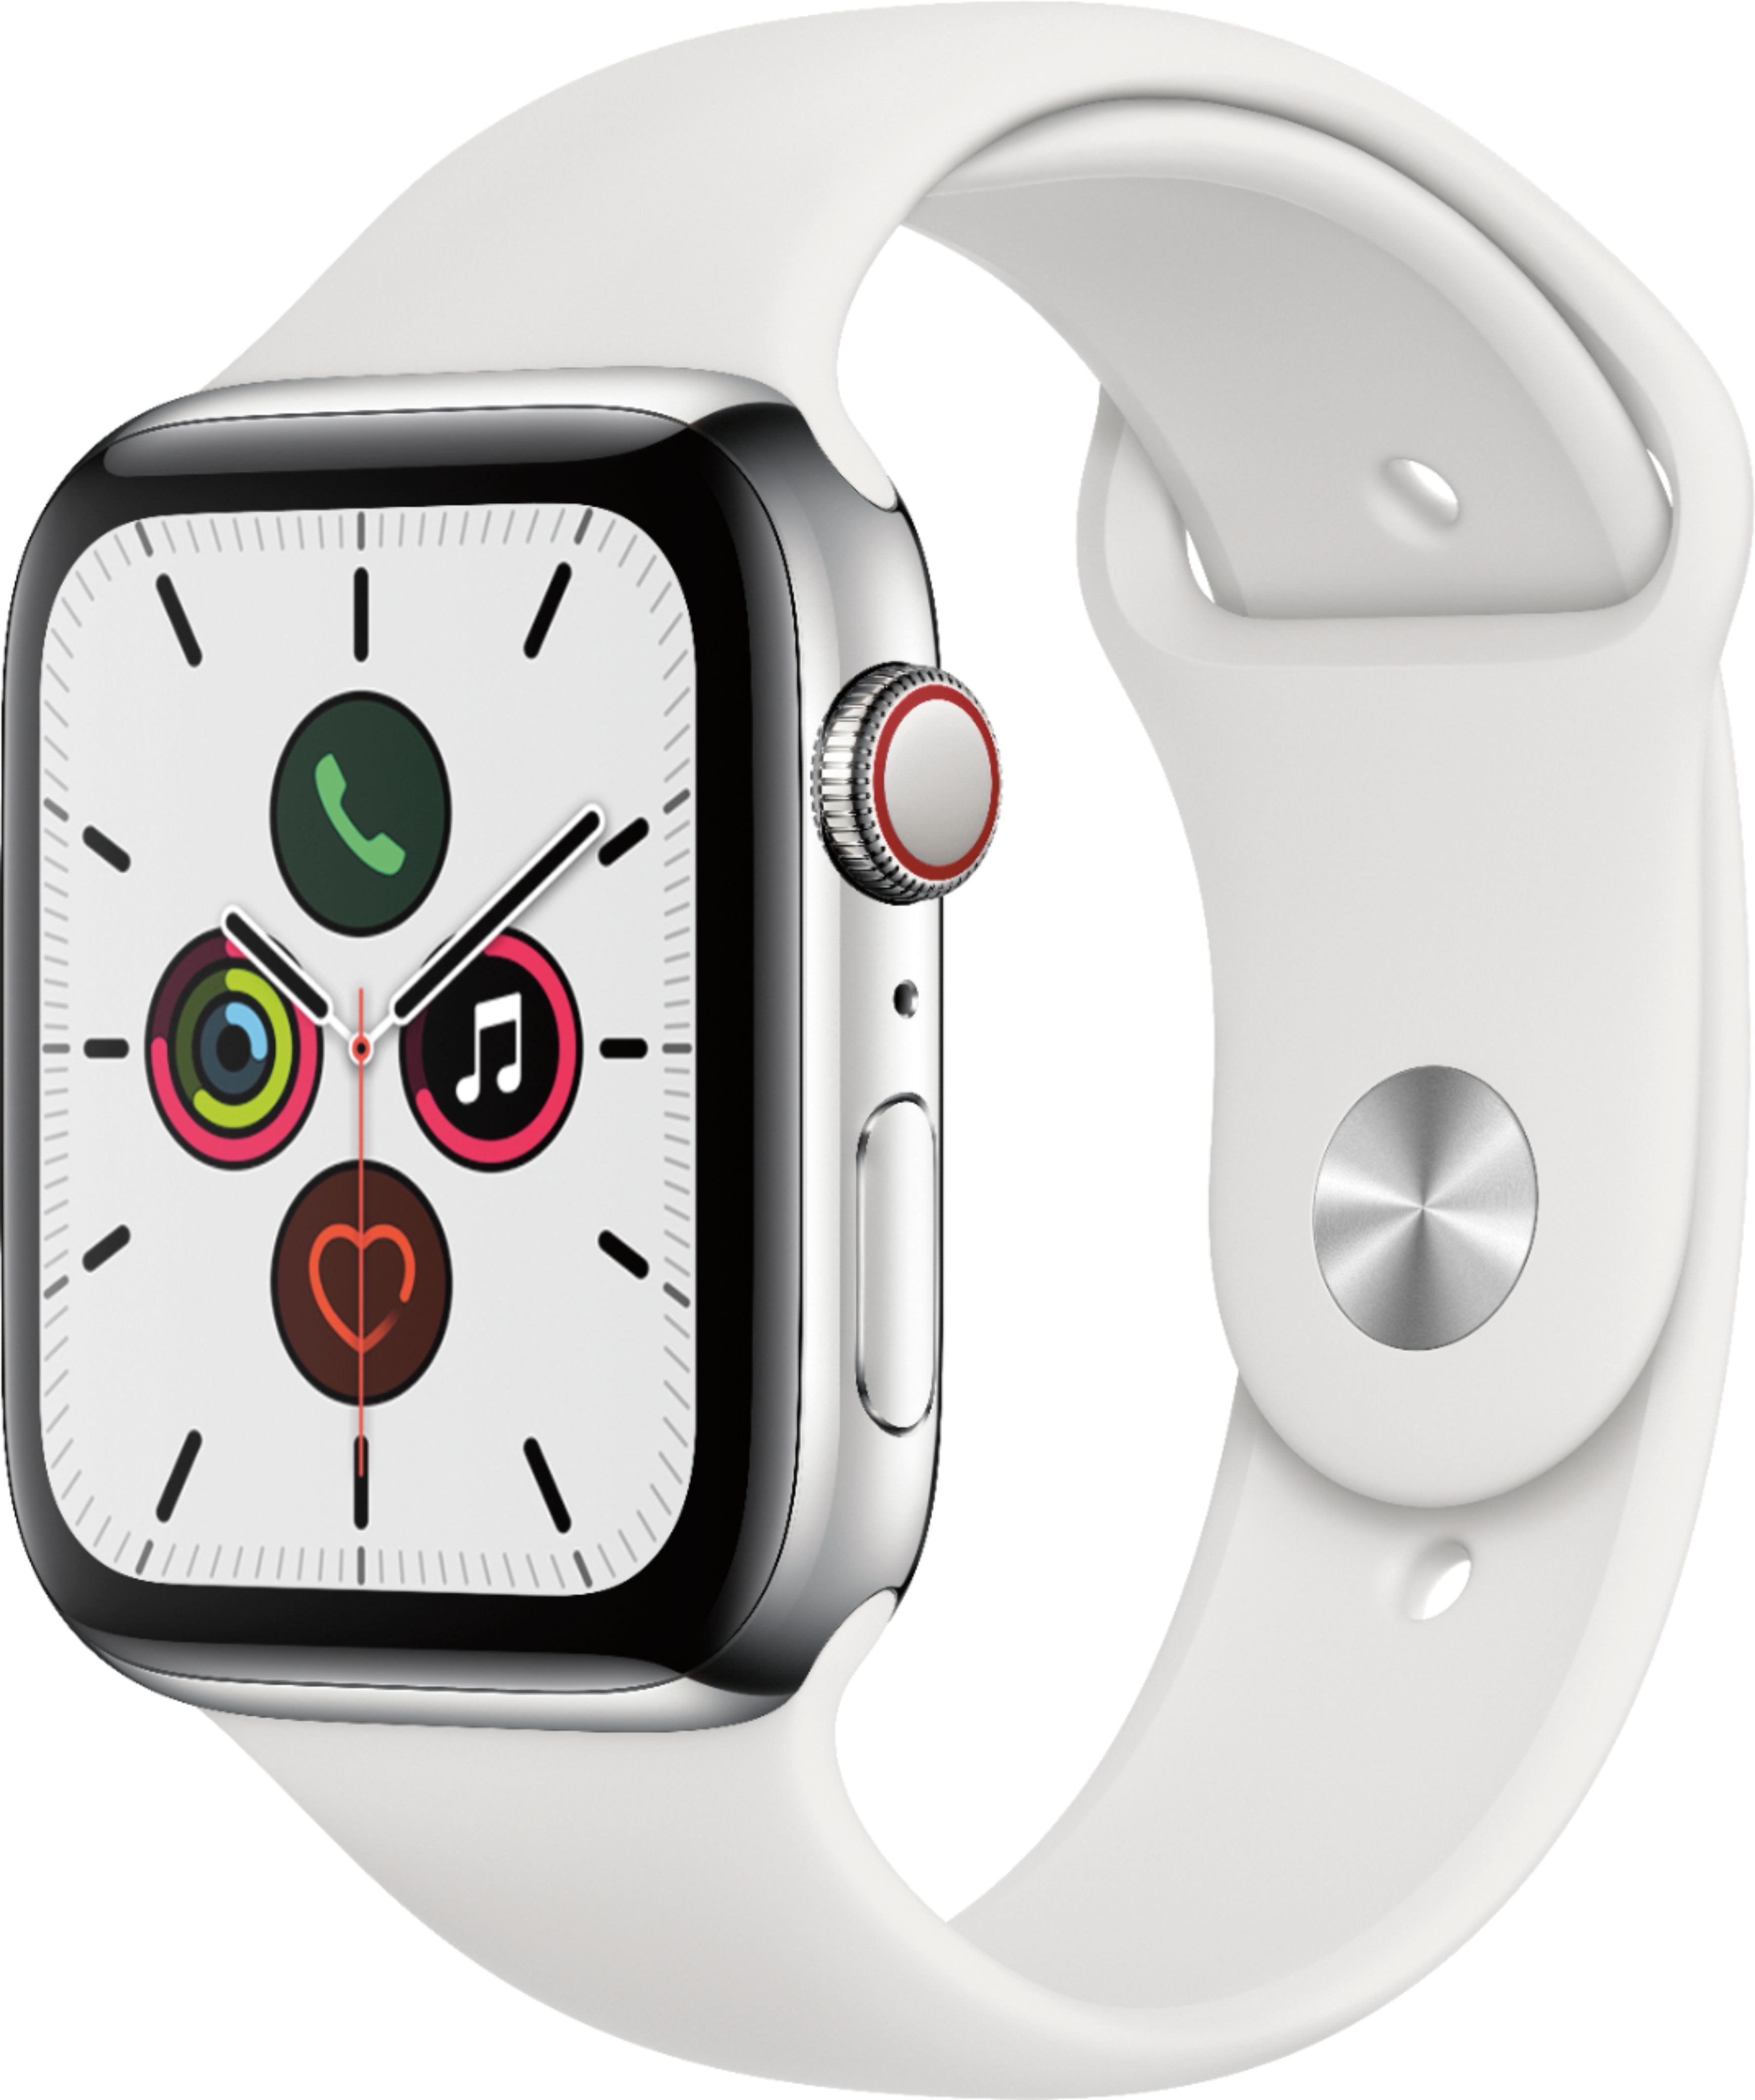 Apple Watch Series 5 On Sale on Sale, UP TO 63% OFF | www 